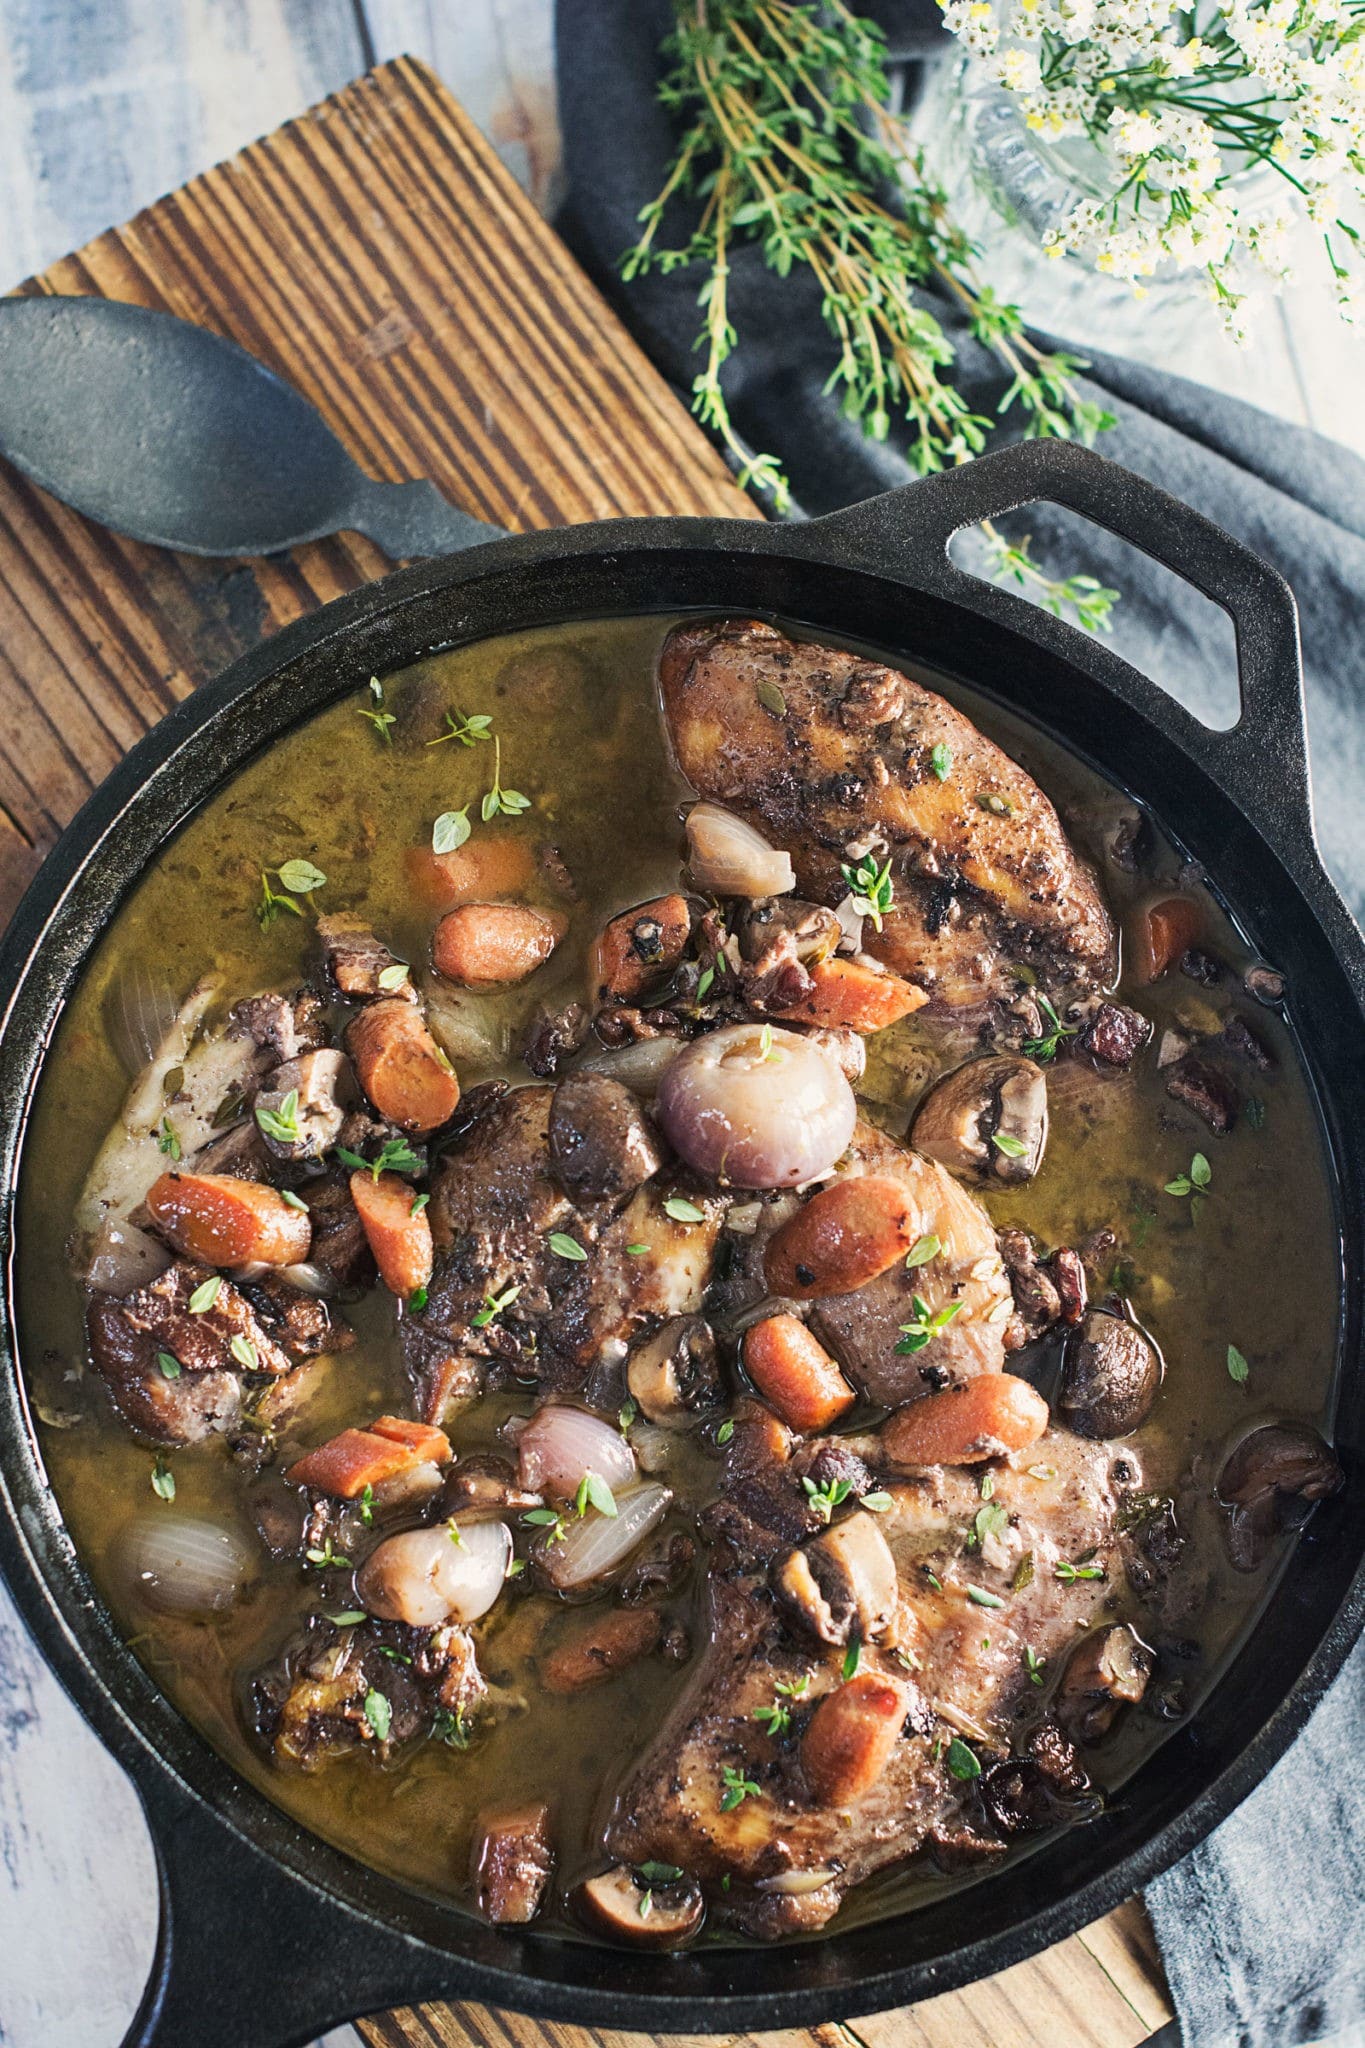 Enjoy this warming Coq au Vin, a French Chicken stew with an incredible red wine soup base! Recipe @LittleFiggyFood